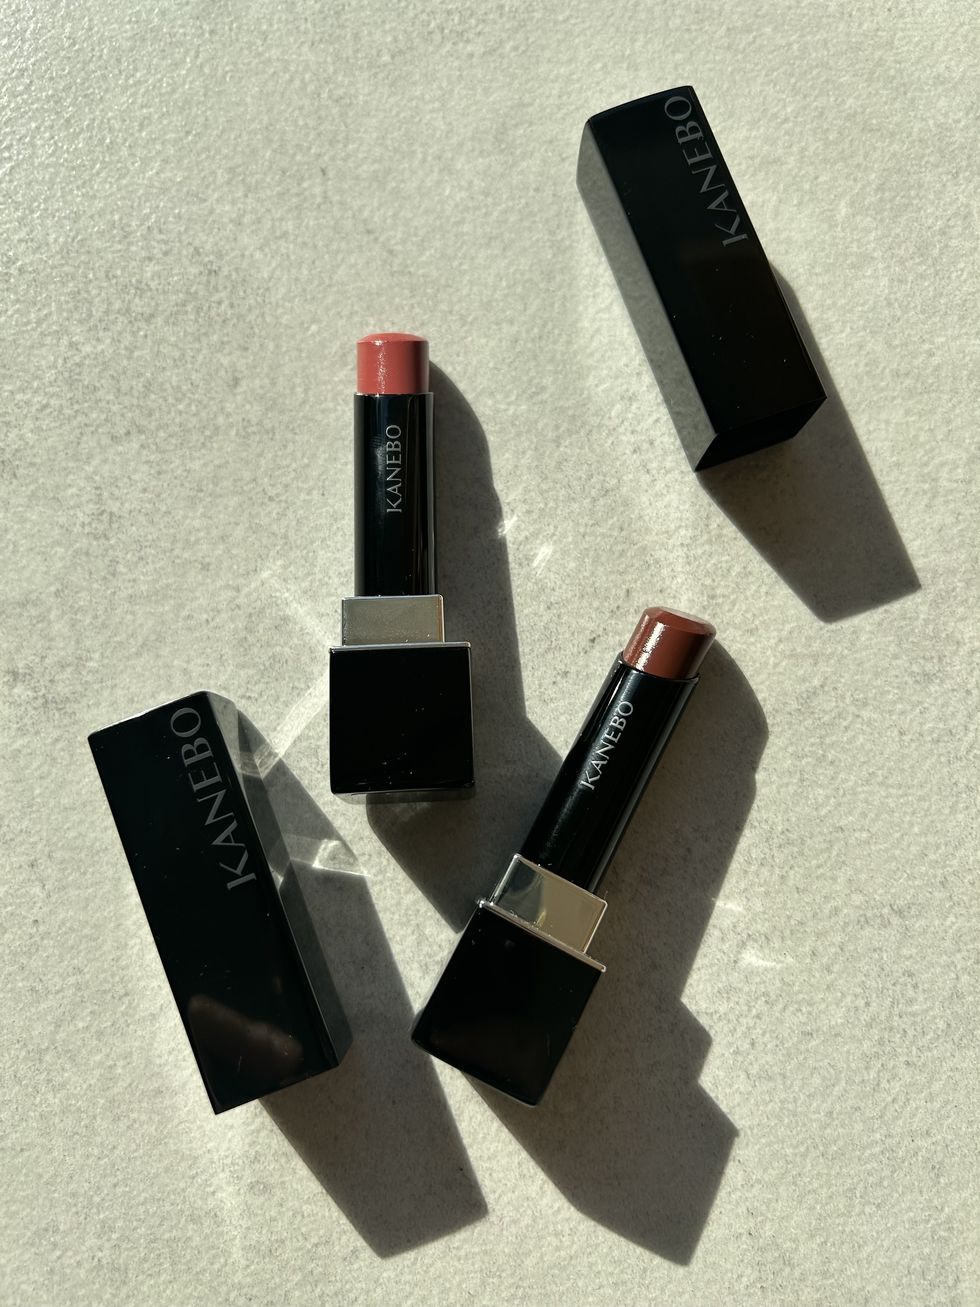 a group of different colored lipsticks